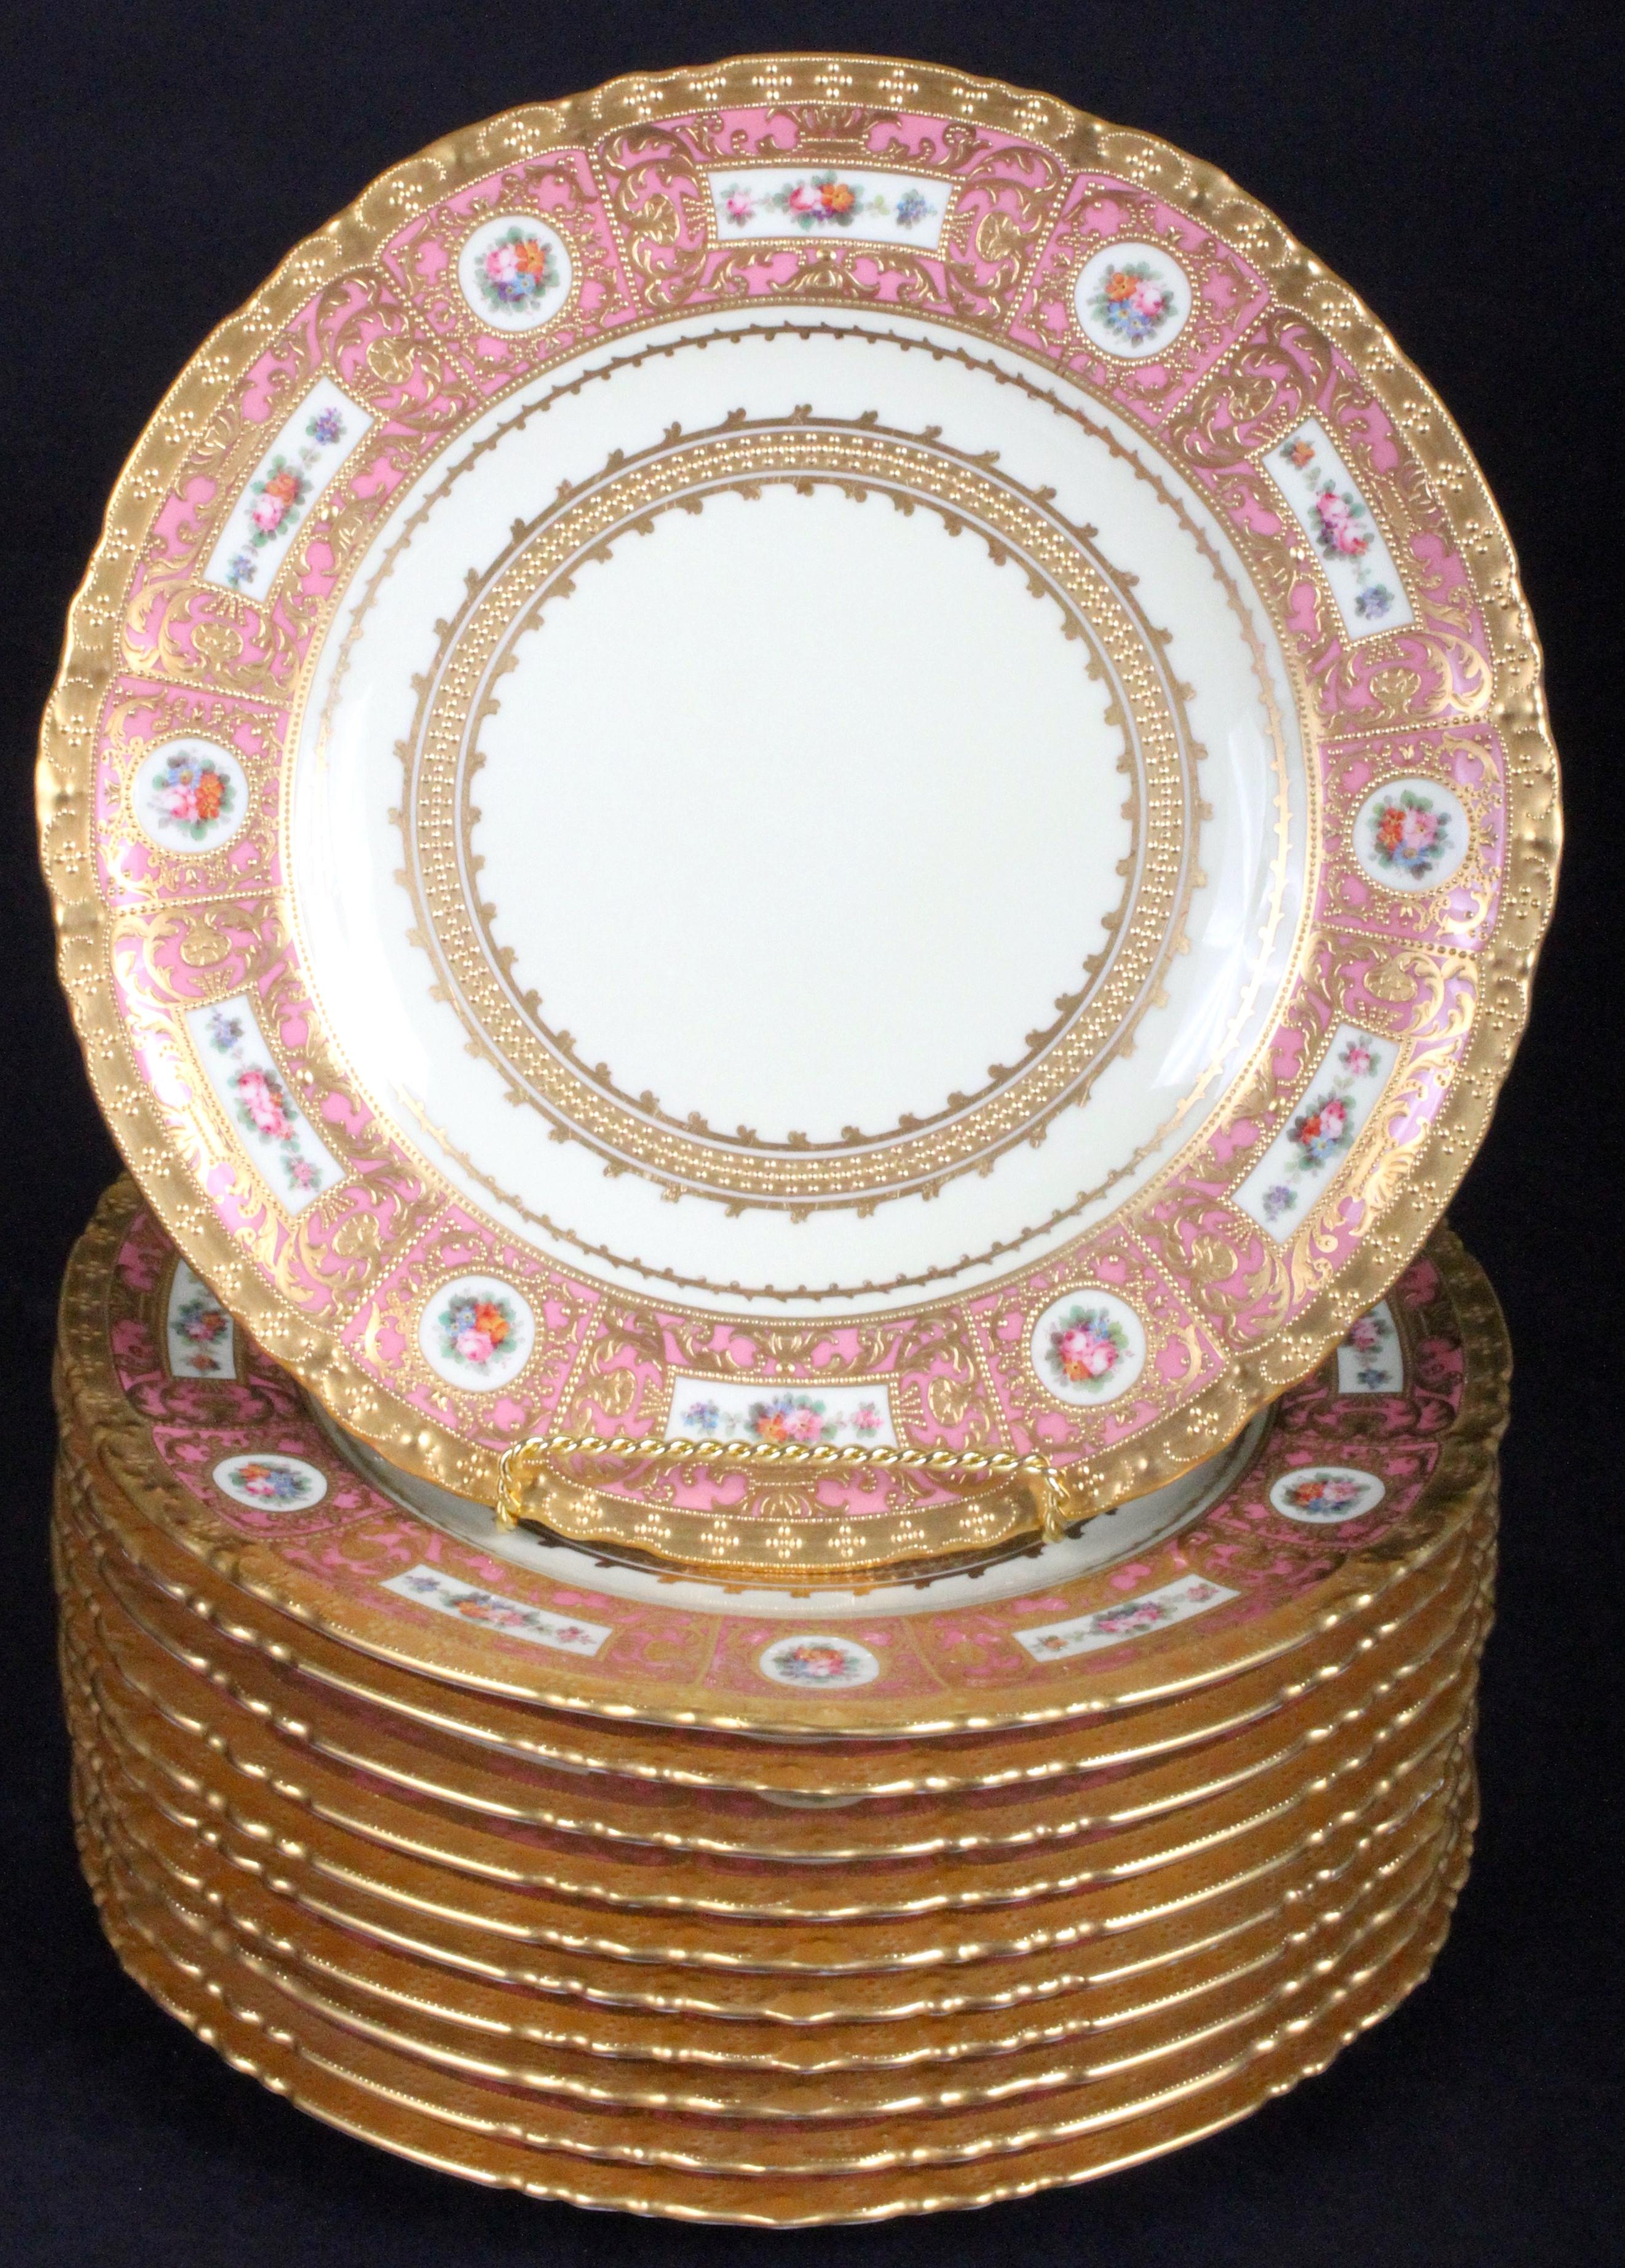 11 Derby for Tiffany Hand Painted and Gilded Pink Service Plates (Neoklassisch) im Angebot